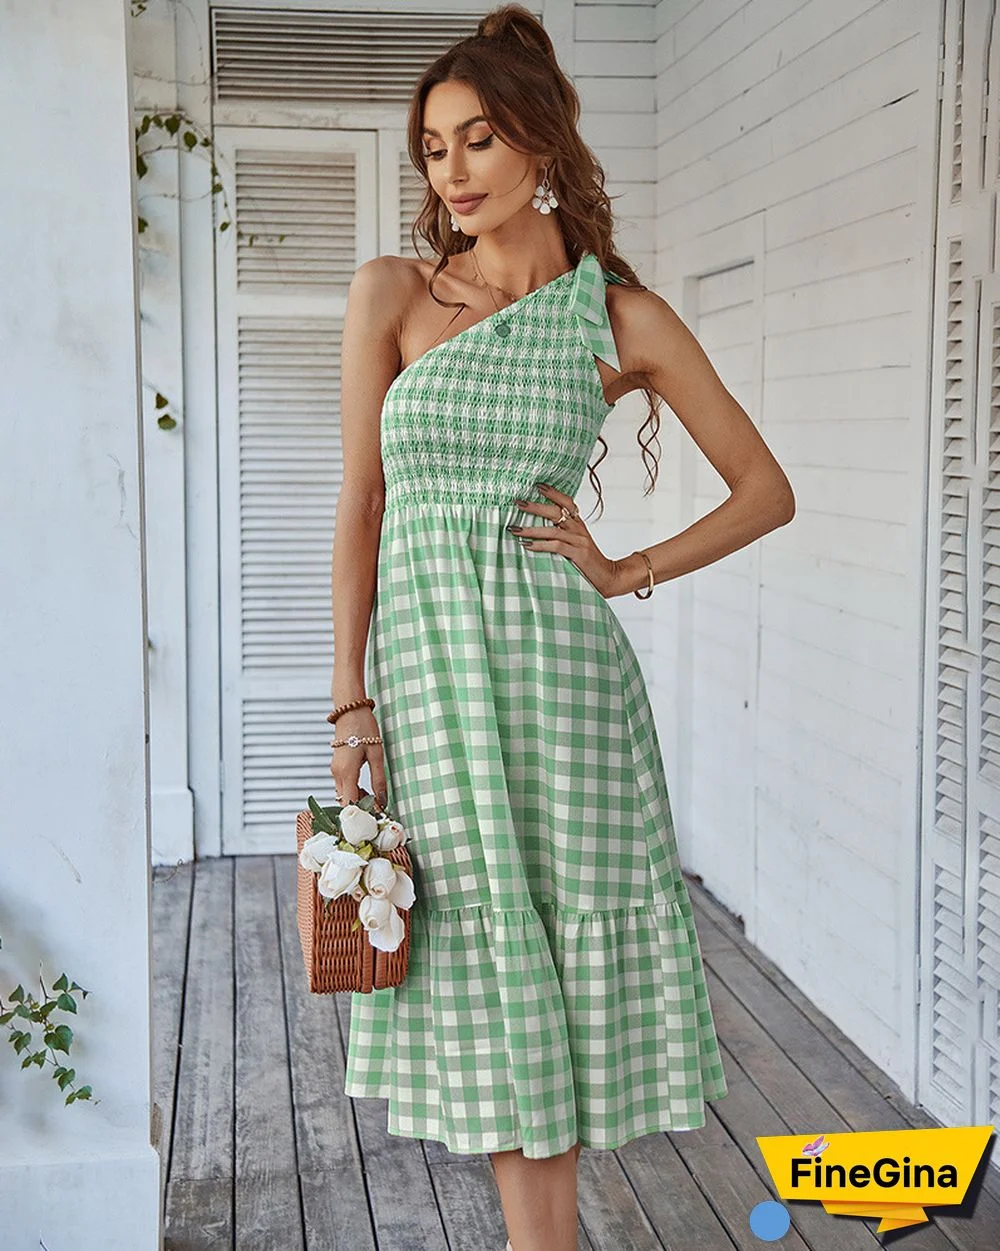 Chic Elegant Check Dress Women Summer Dresses New Folds Sexy Strapless Inclined Shoulder Big Swing Casual Vacation Dress